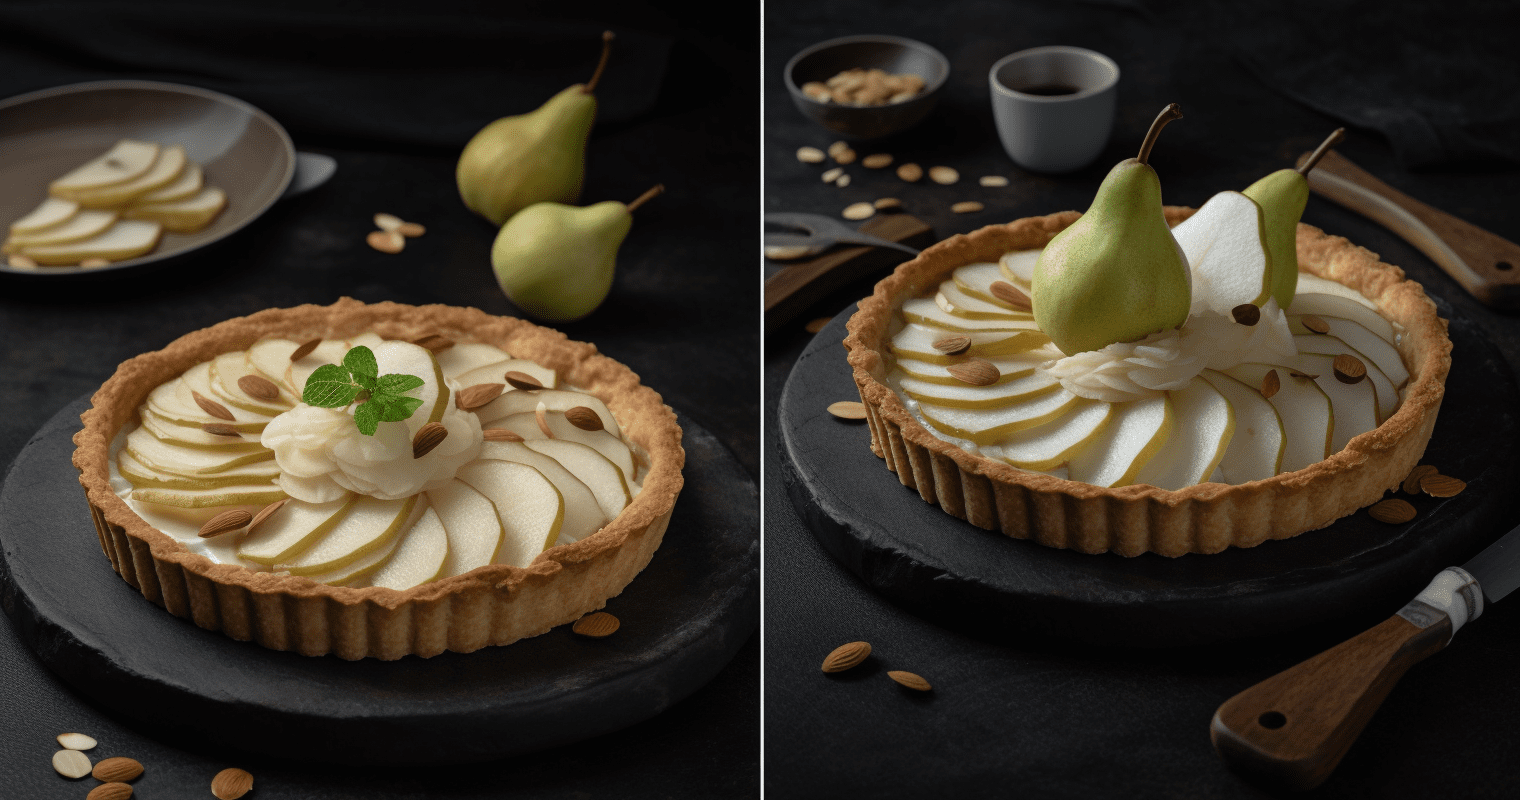 Pear and Almond Tart - Slice on a Plate